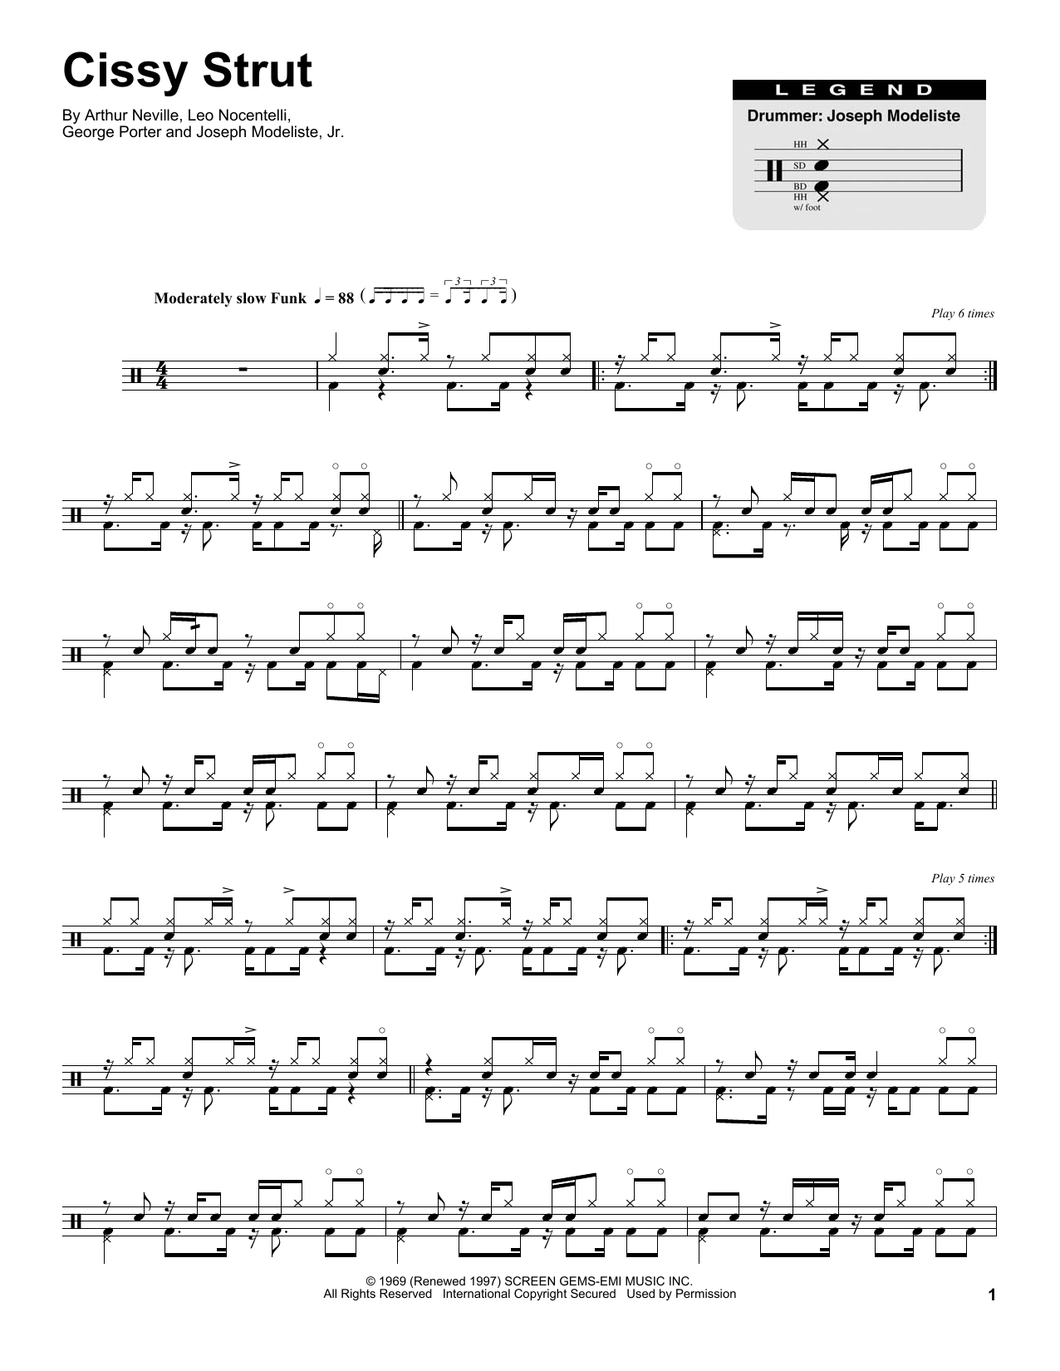 Cissy Strut - The Meters - Full Drum Transcription / Drum Sheet Music - SheetMusicDirect DT174634